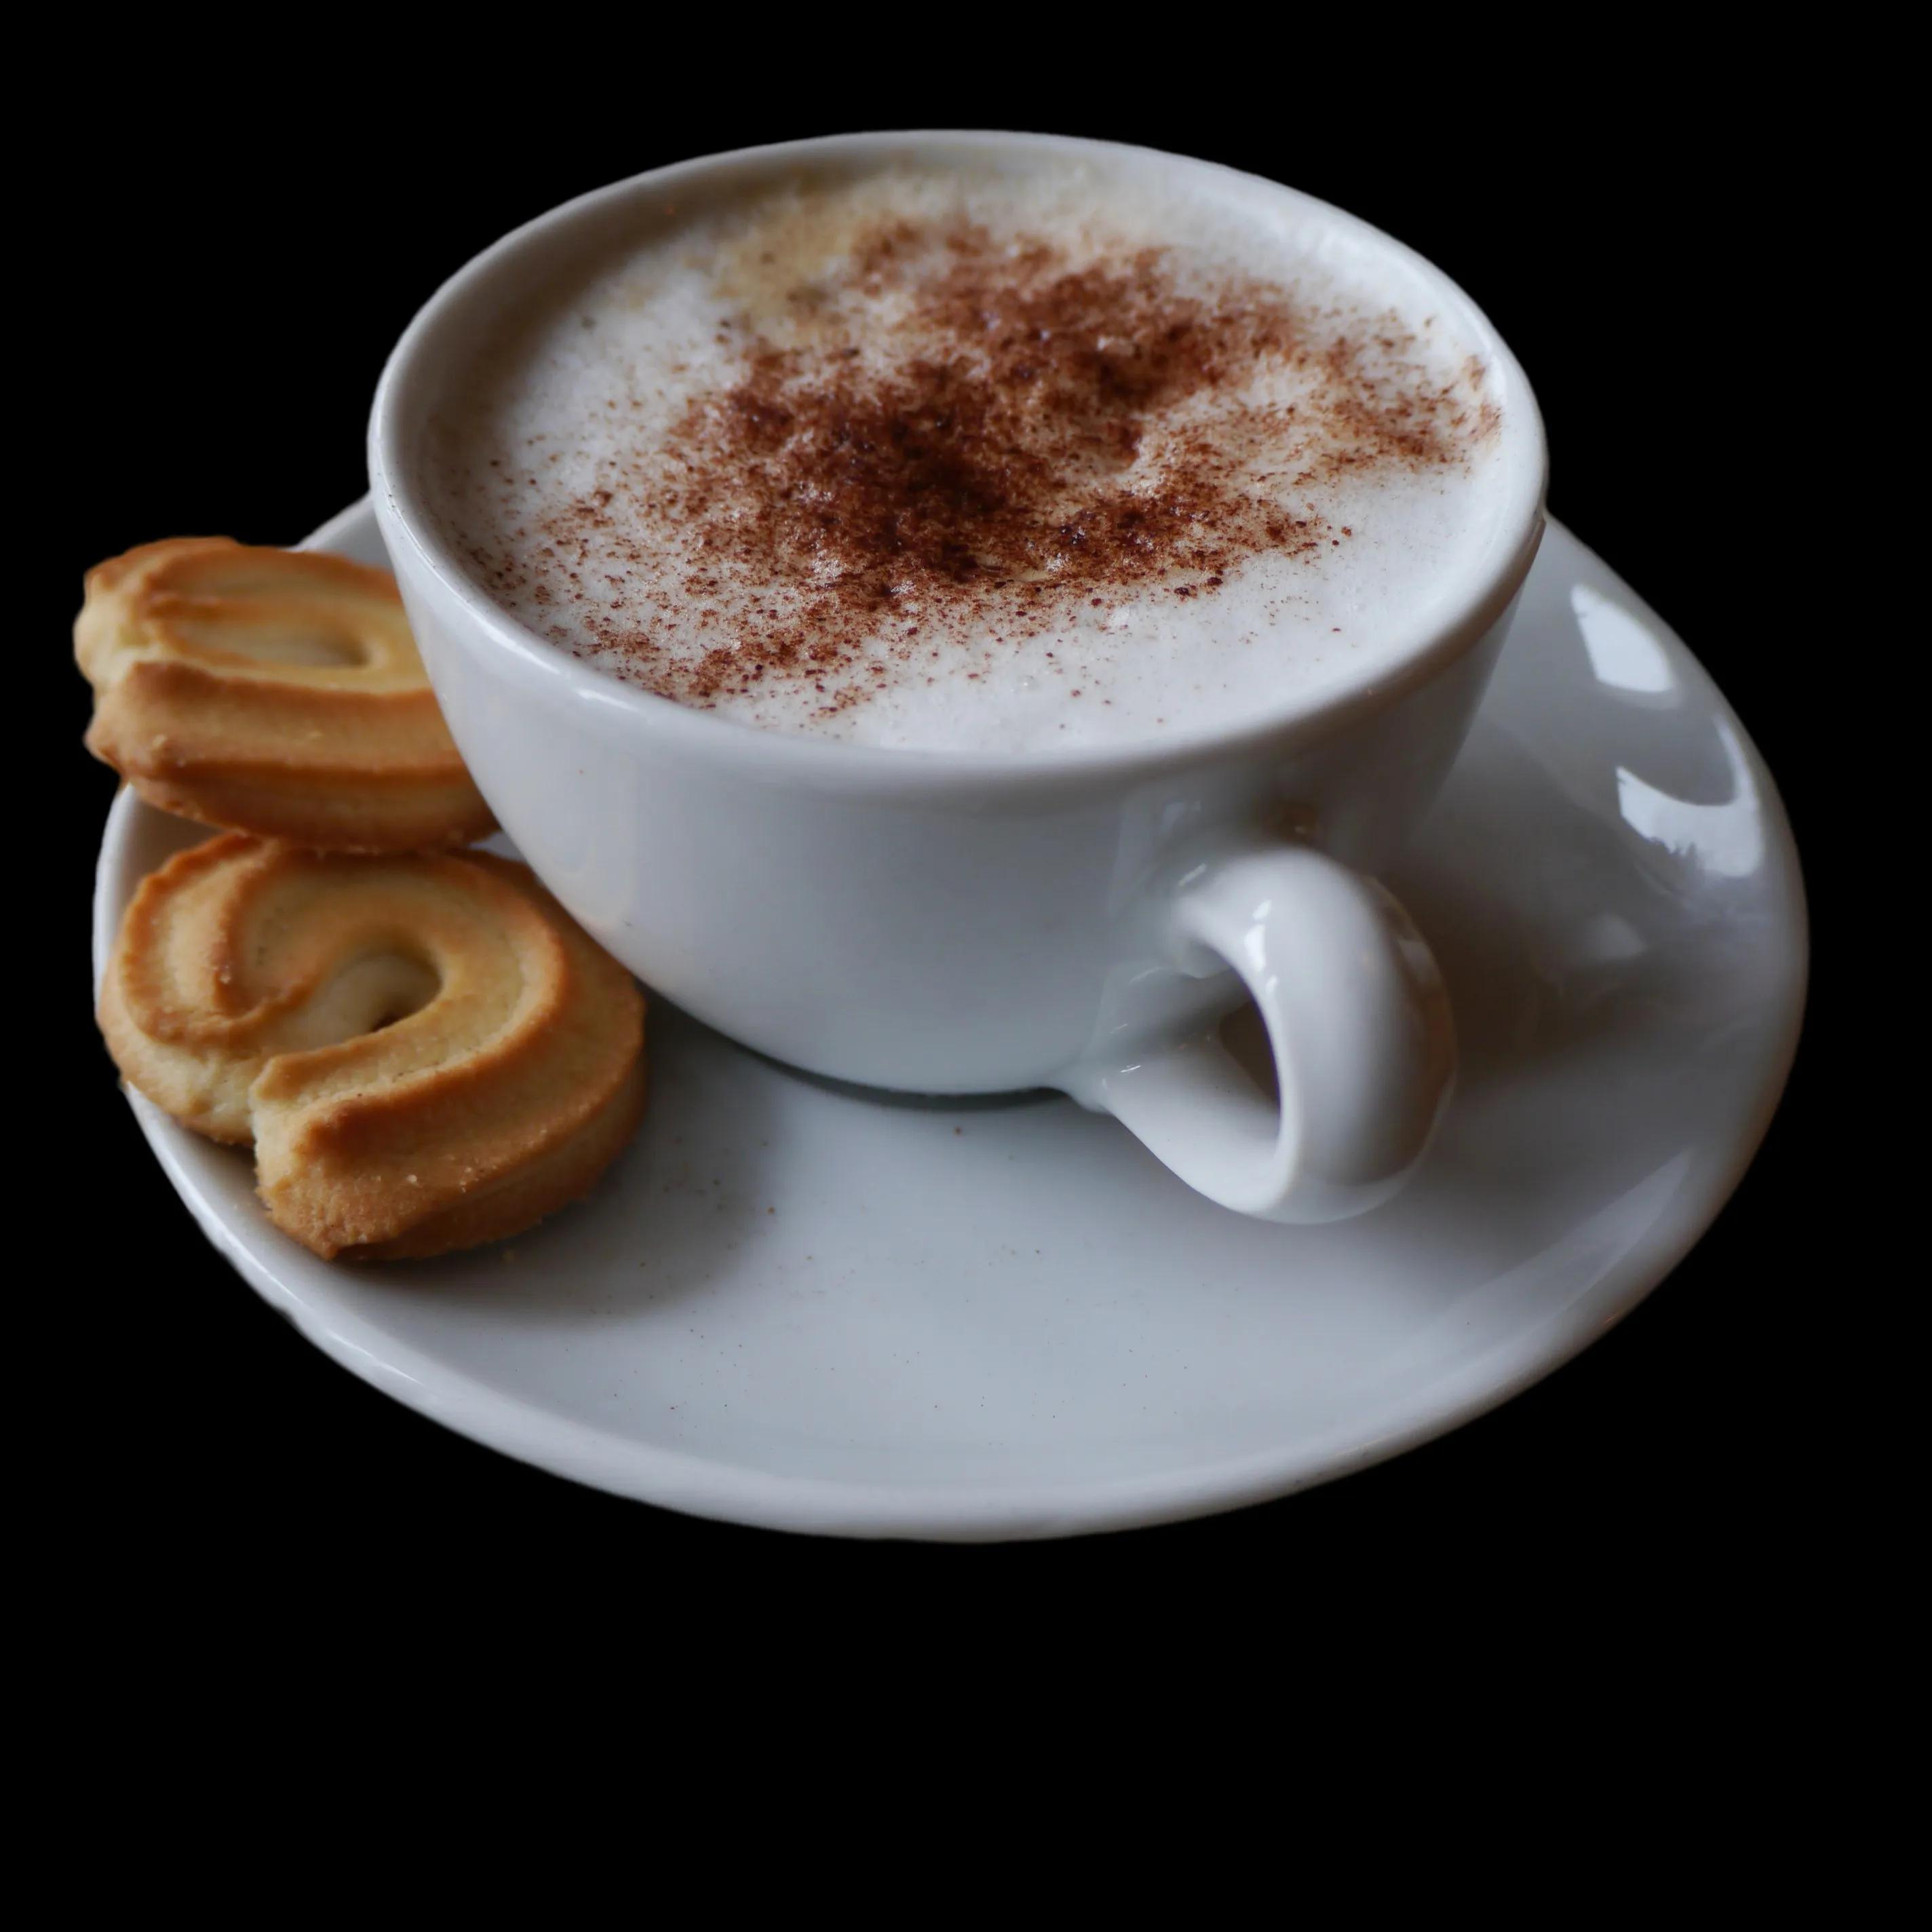 Free Images : latte, cappuccino, saucer, drink, espresso, coffee cup ...